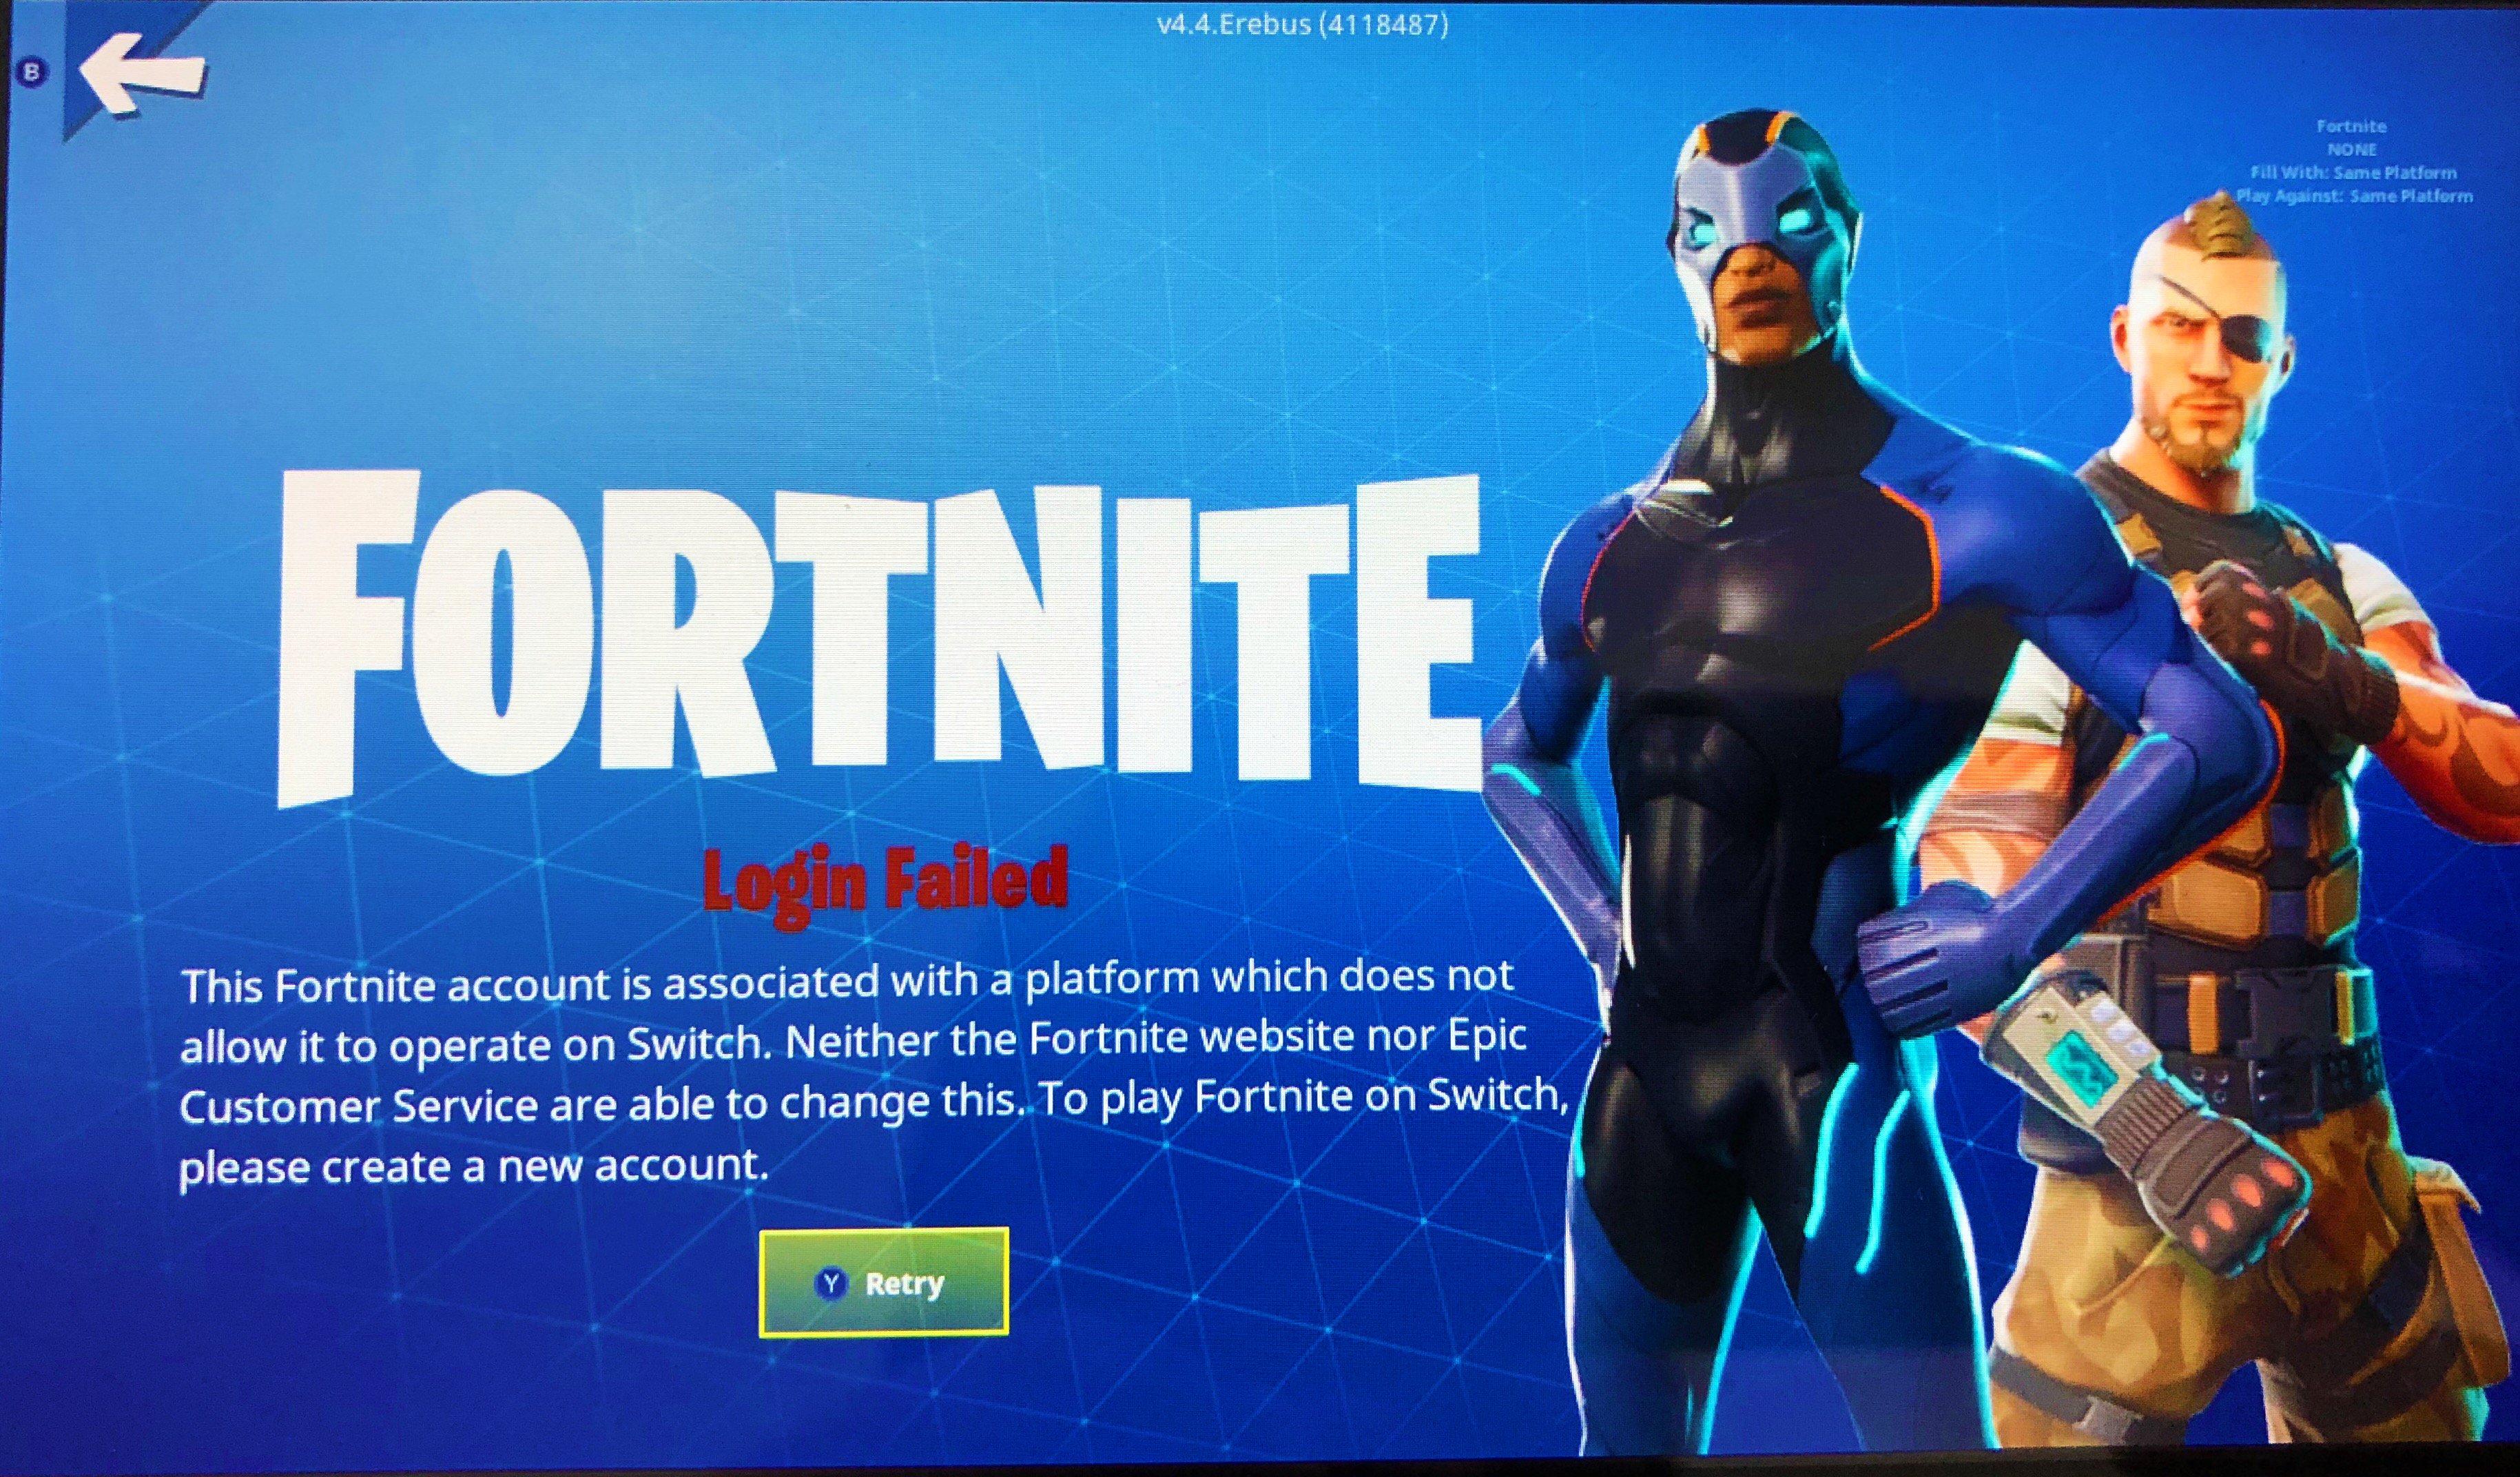 Muligt bidragyder underjordisk Greg Miller on Twitter: ".@PlayStation, fix this. Not allowing me to sign-in  to Fortnite Switch with my Epic account because it's linked to PS4 is tone  deaf and points more to fear